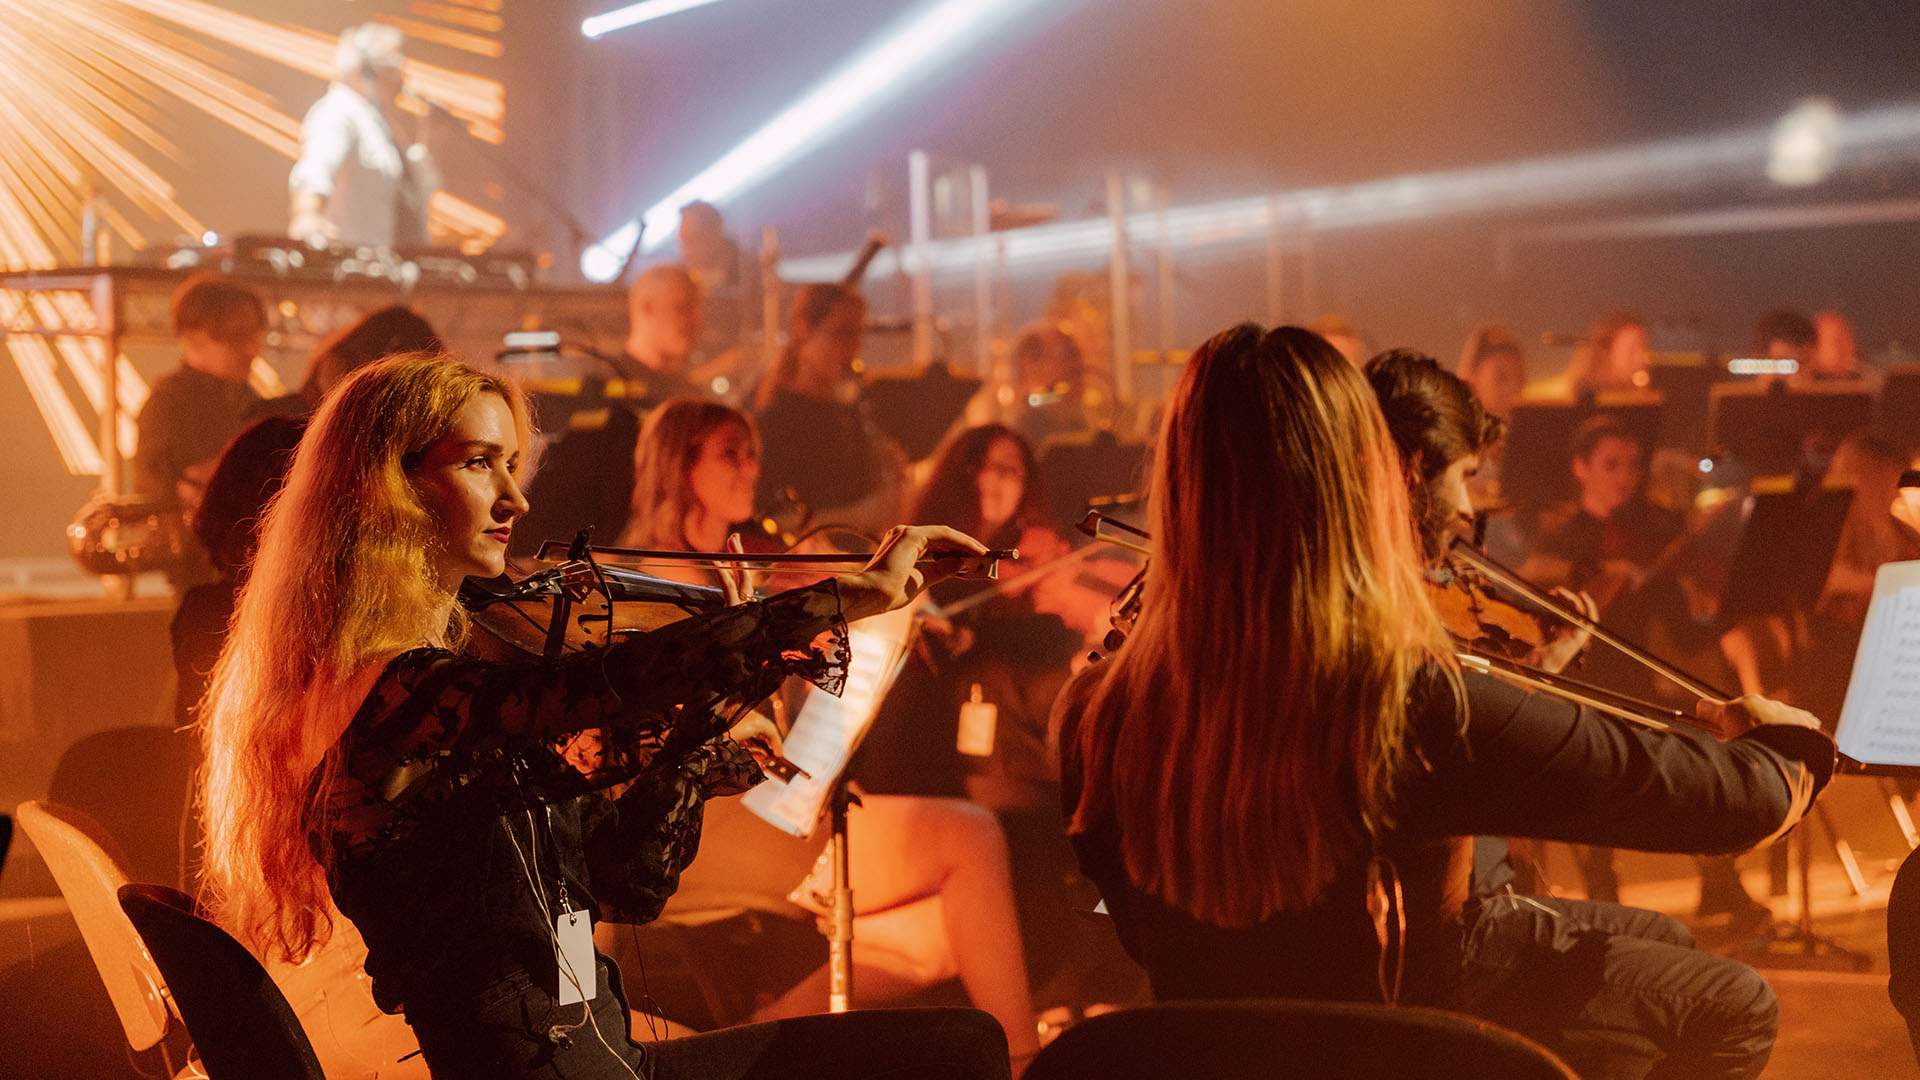 Ministry of Sound Is Hitting Entertainment Quarter with a Massive Orchestra Show Filled with Dance Music